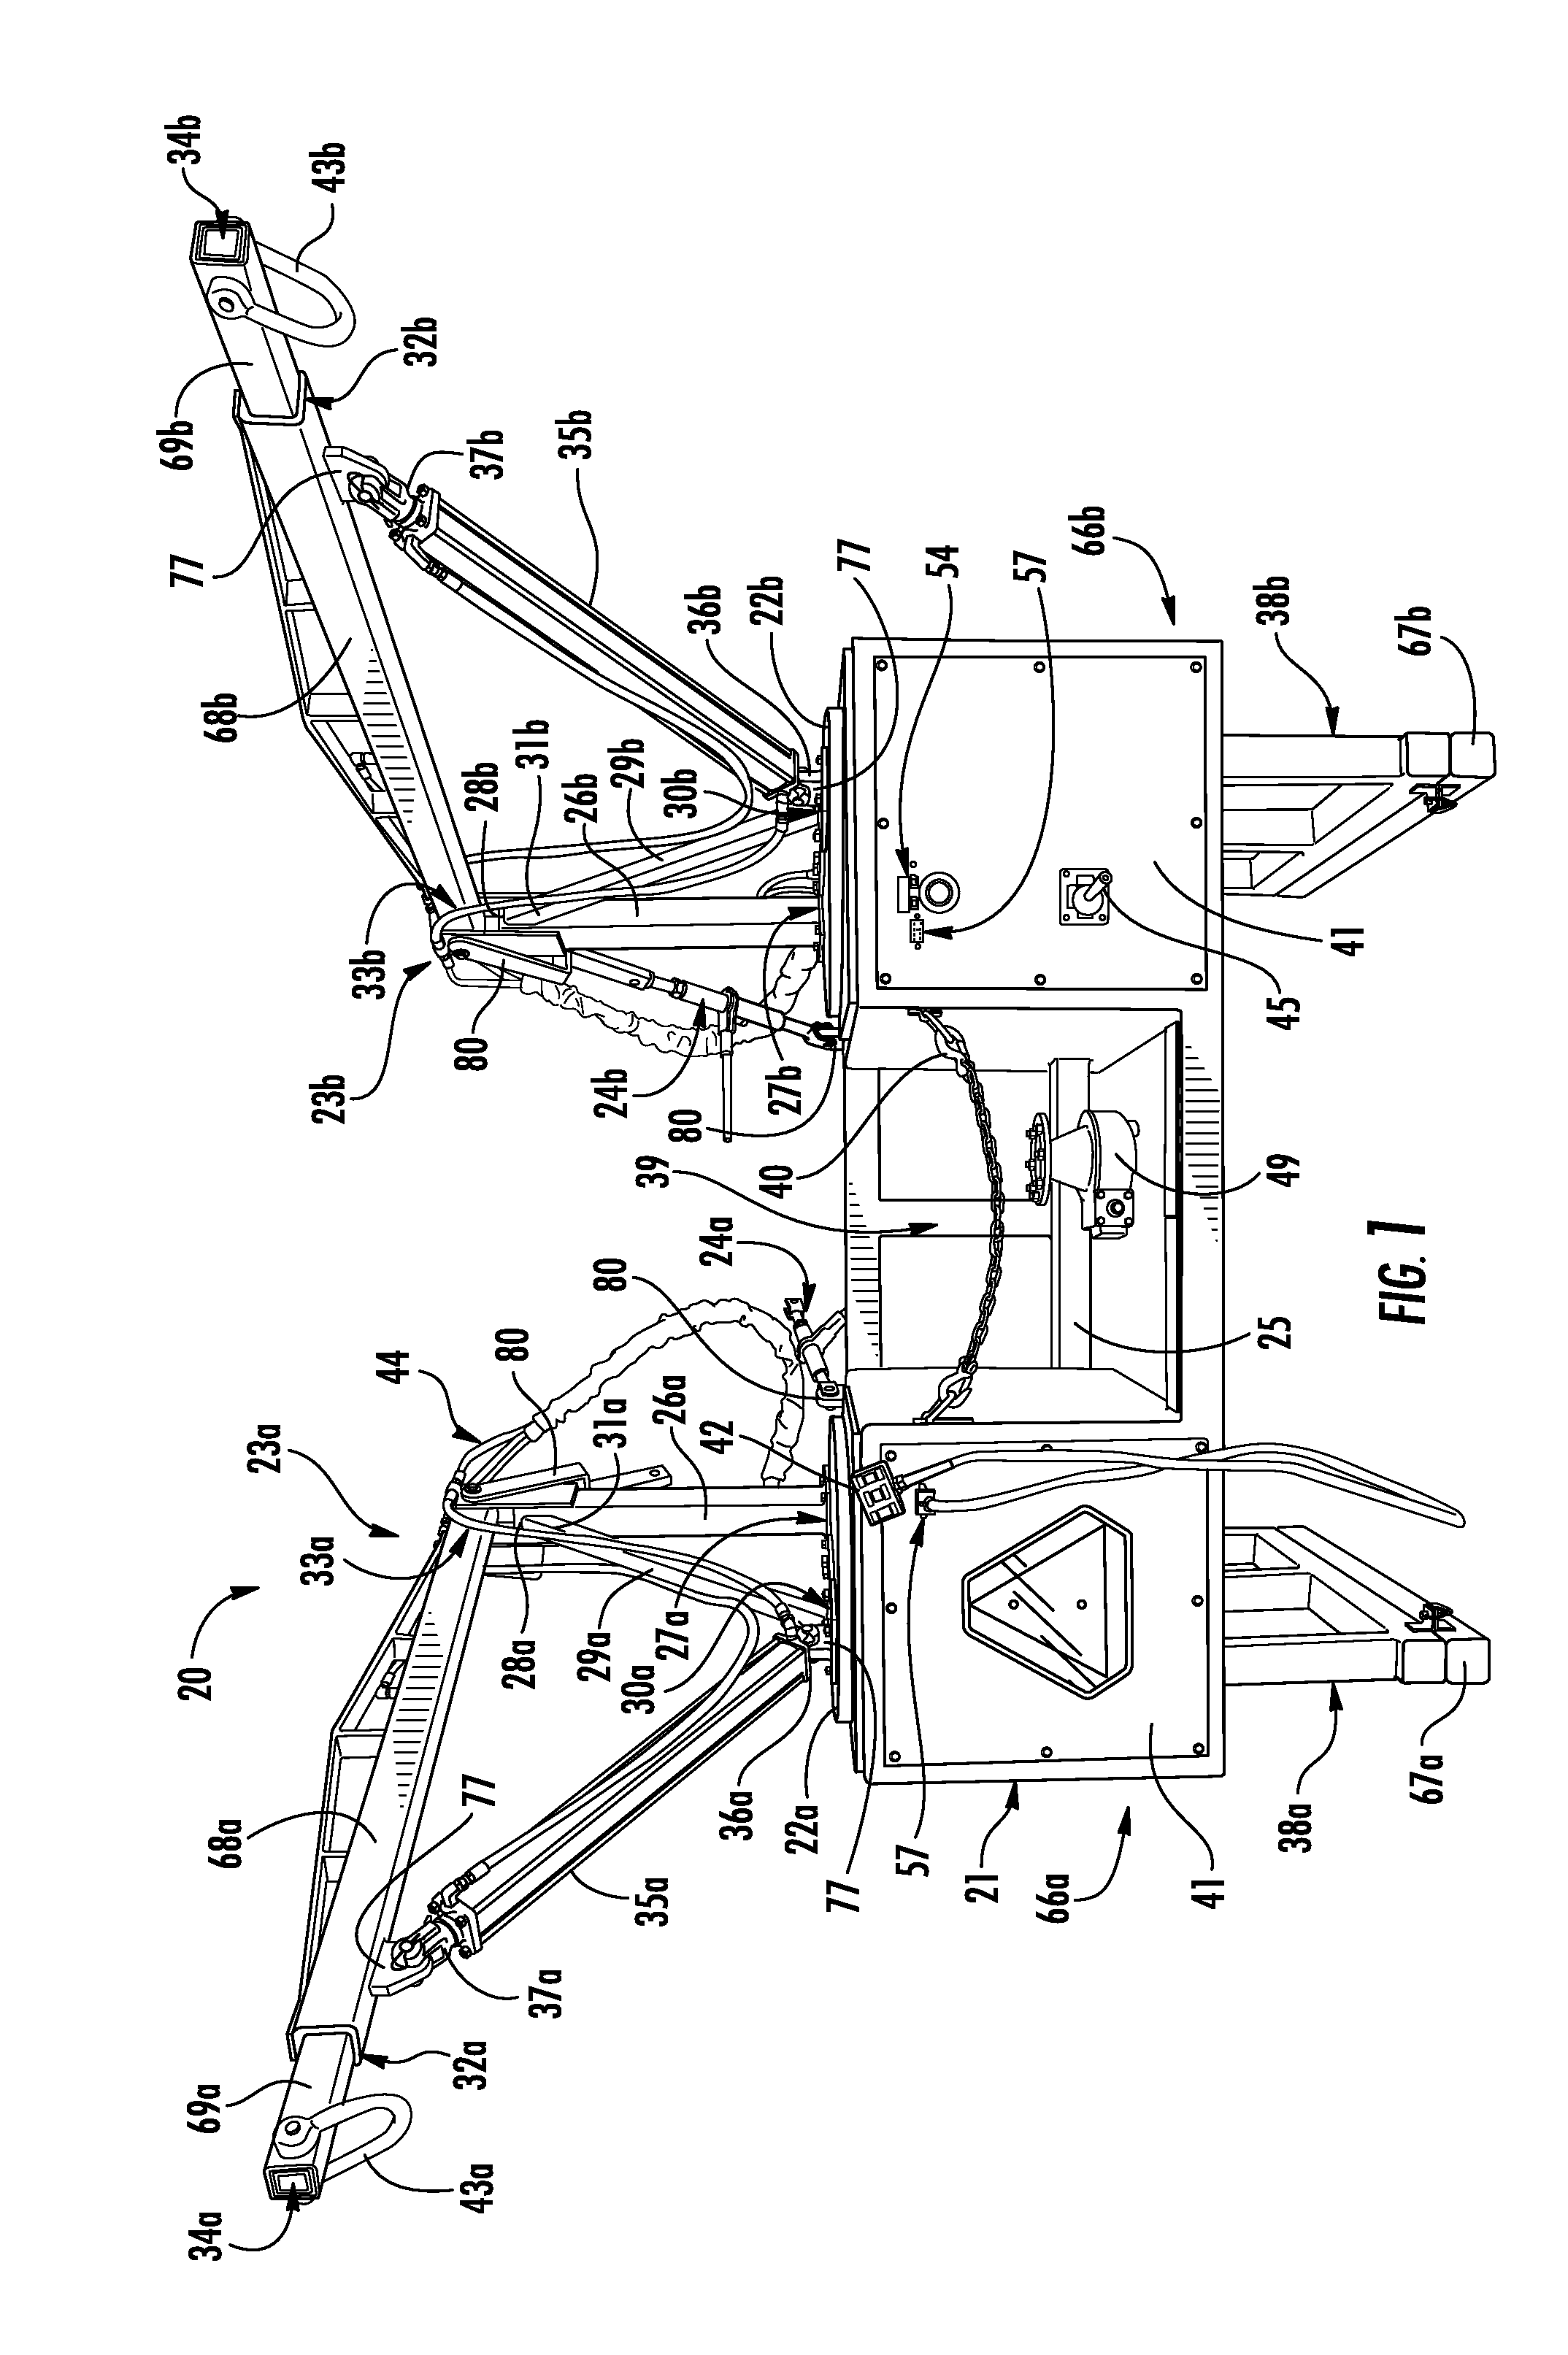 Dual Crane Apparatus and Method of Use